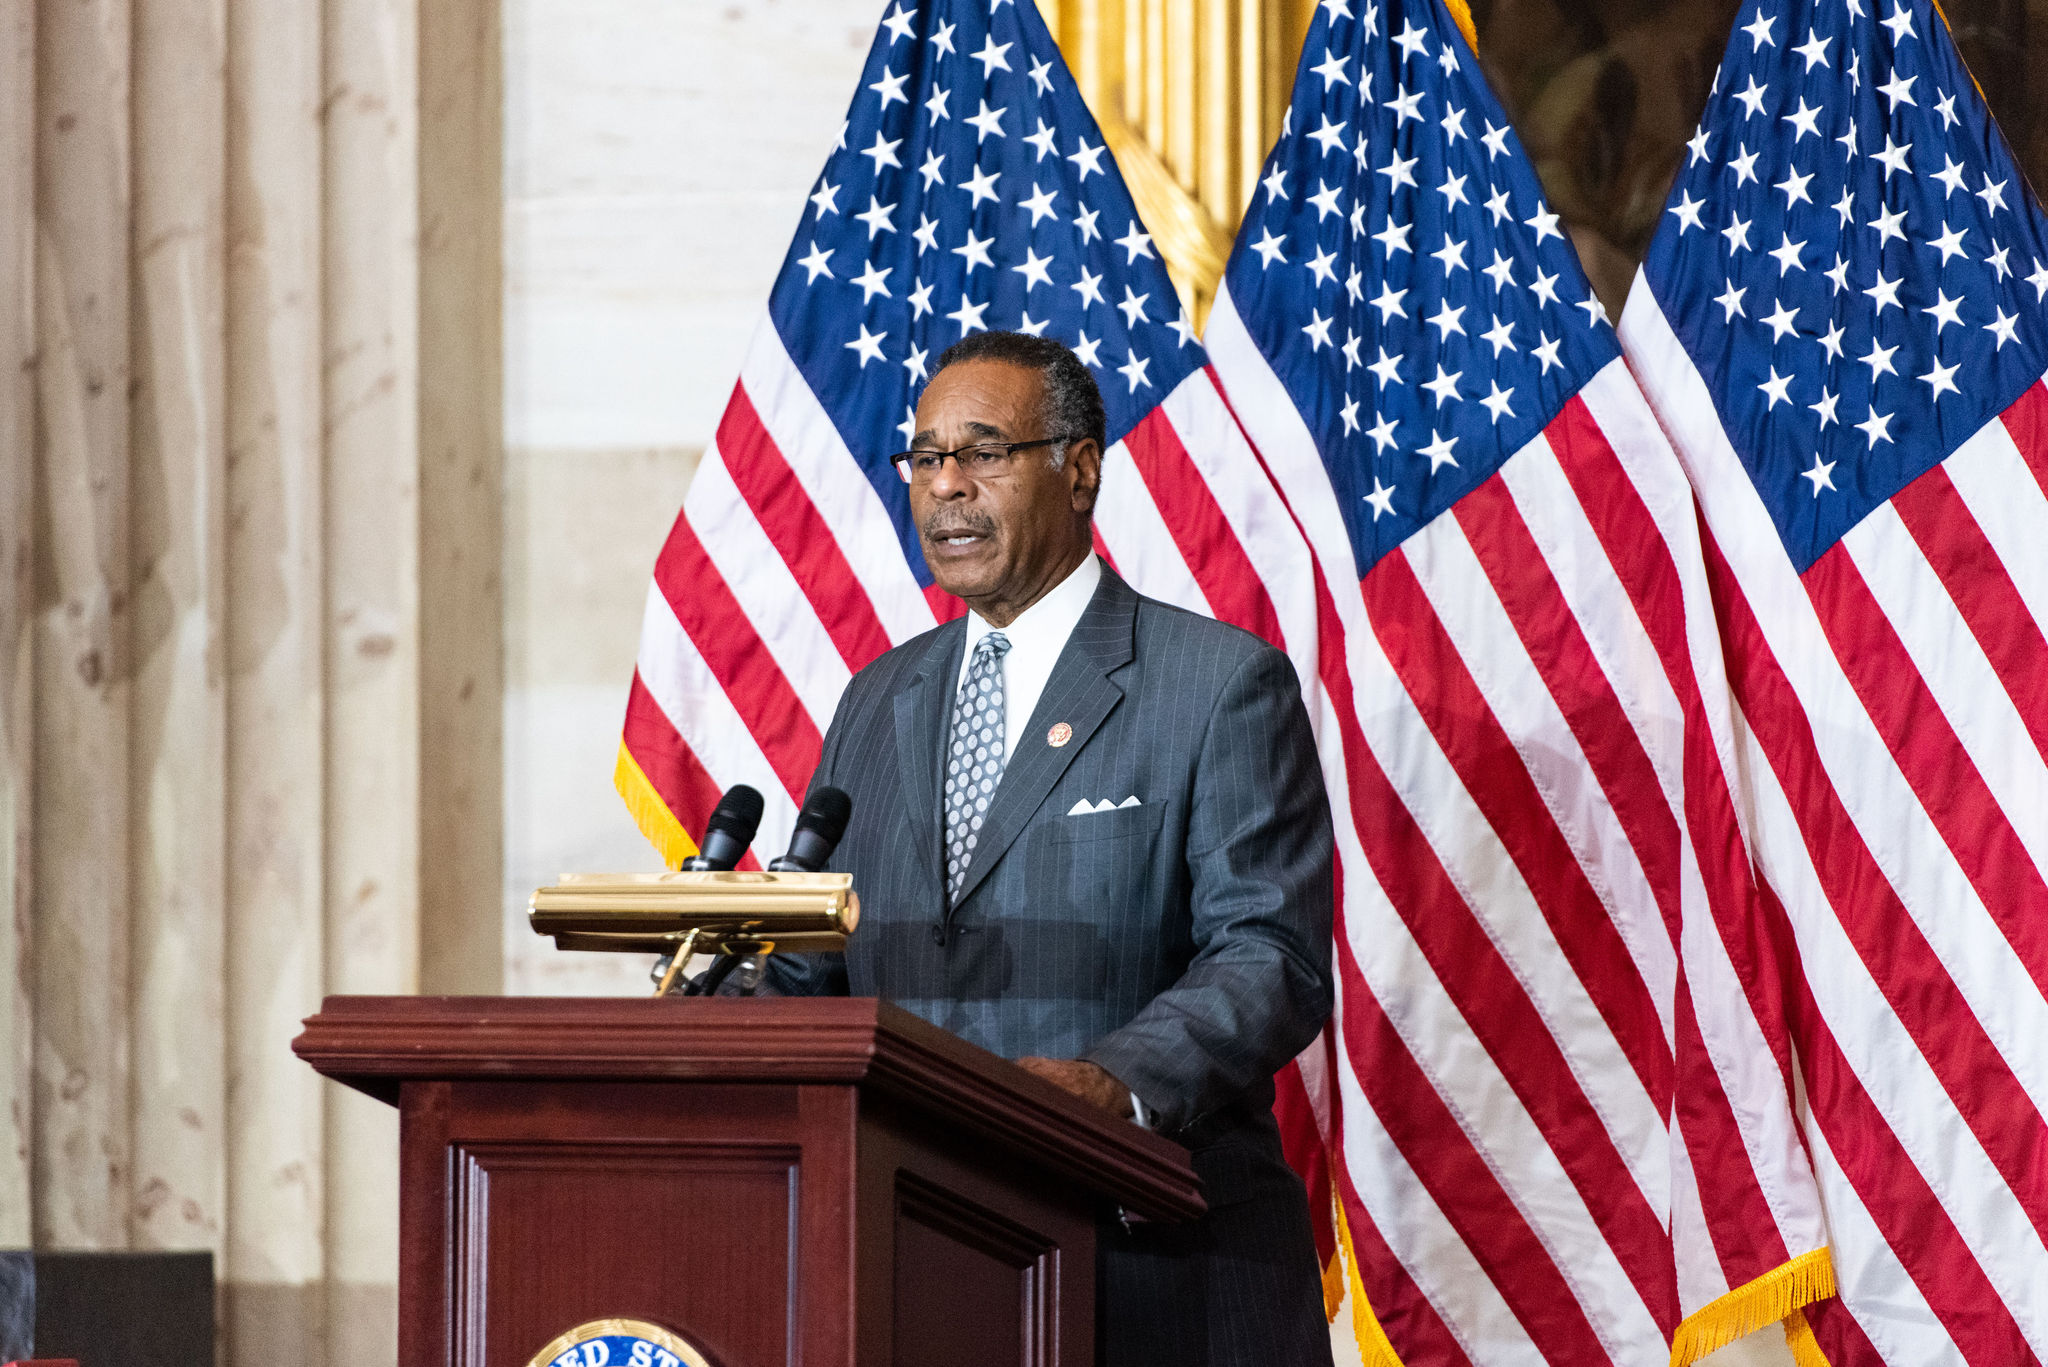 Honorable Emanuel Cleaver II spoke at the unveiling and dedication of the Truman Statue in the U.S. Capitol Rotunda